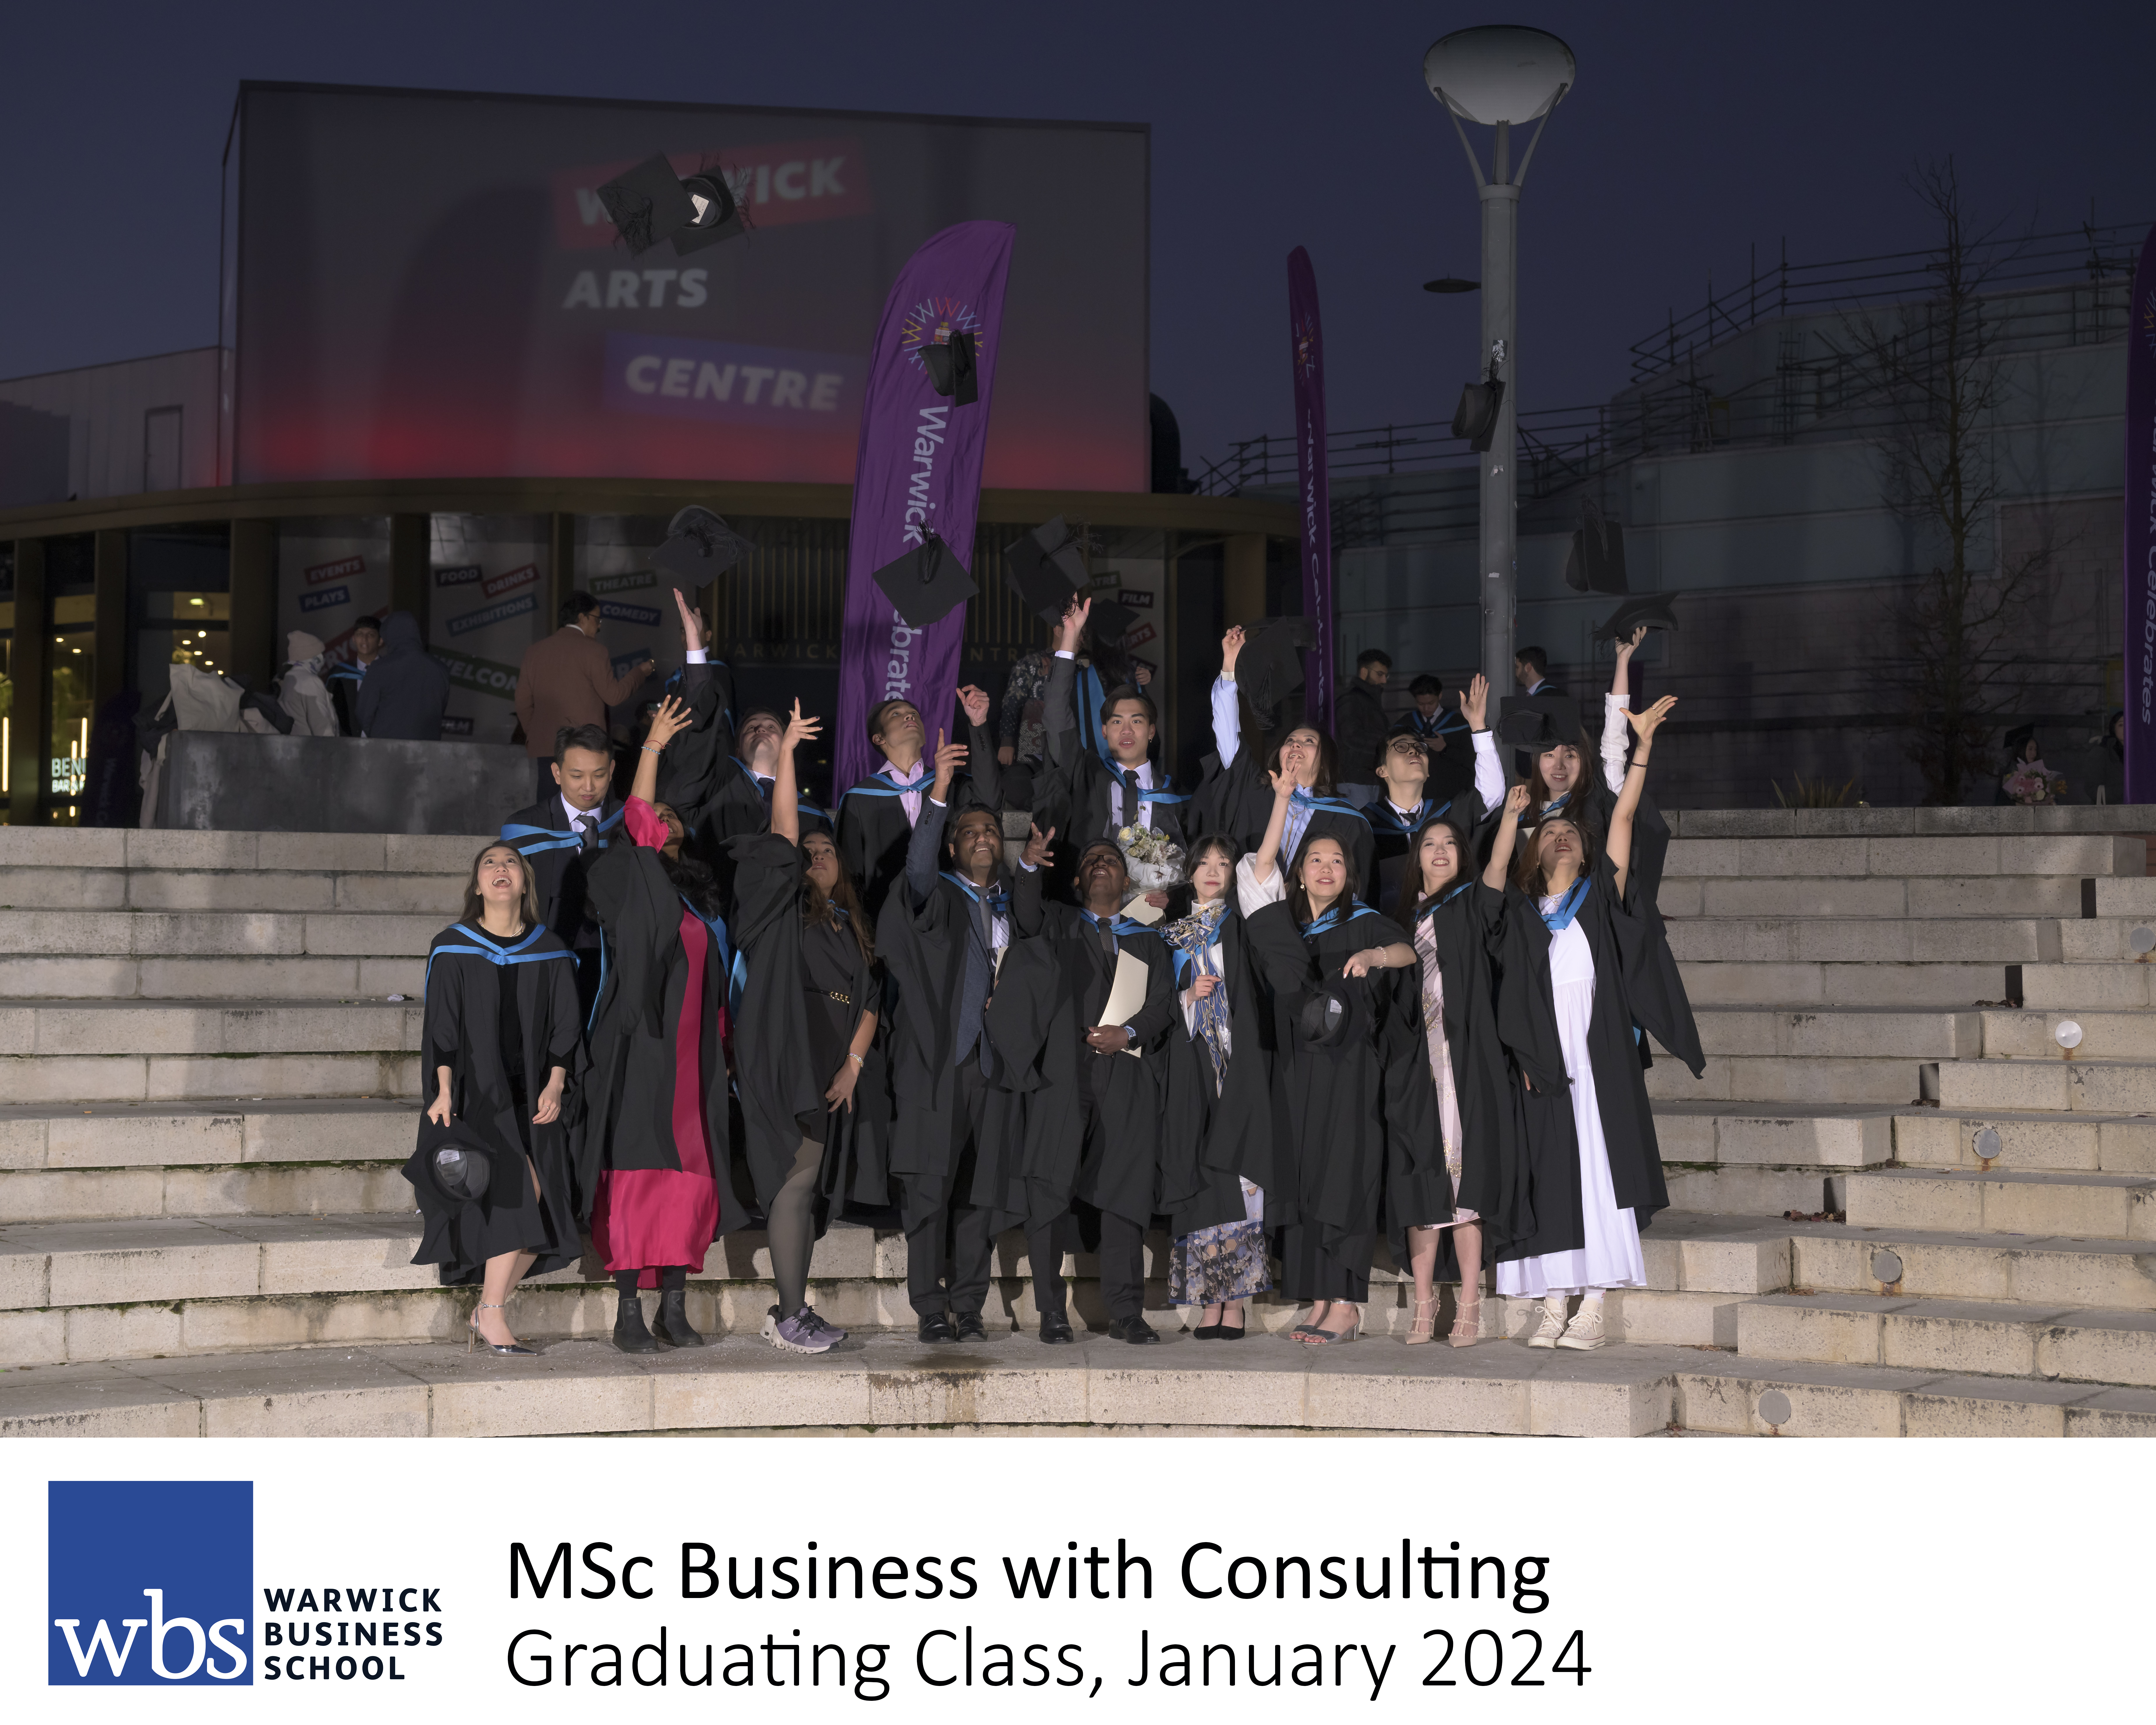 wbs_grad_jan_24_msc_business_with_consulting_hats_1_captioned.jpg